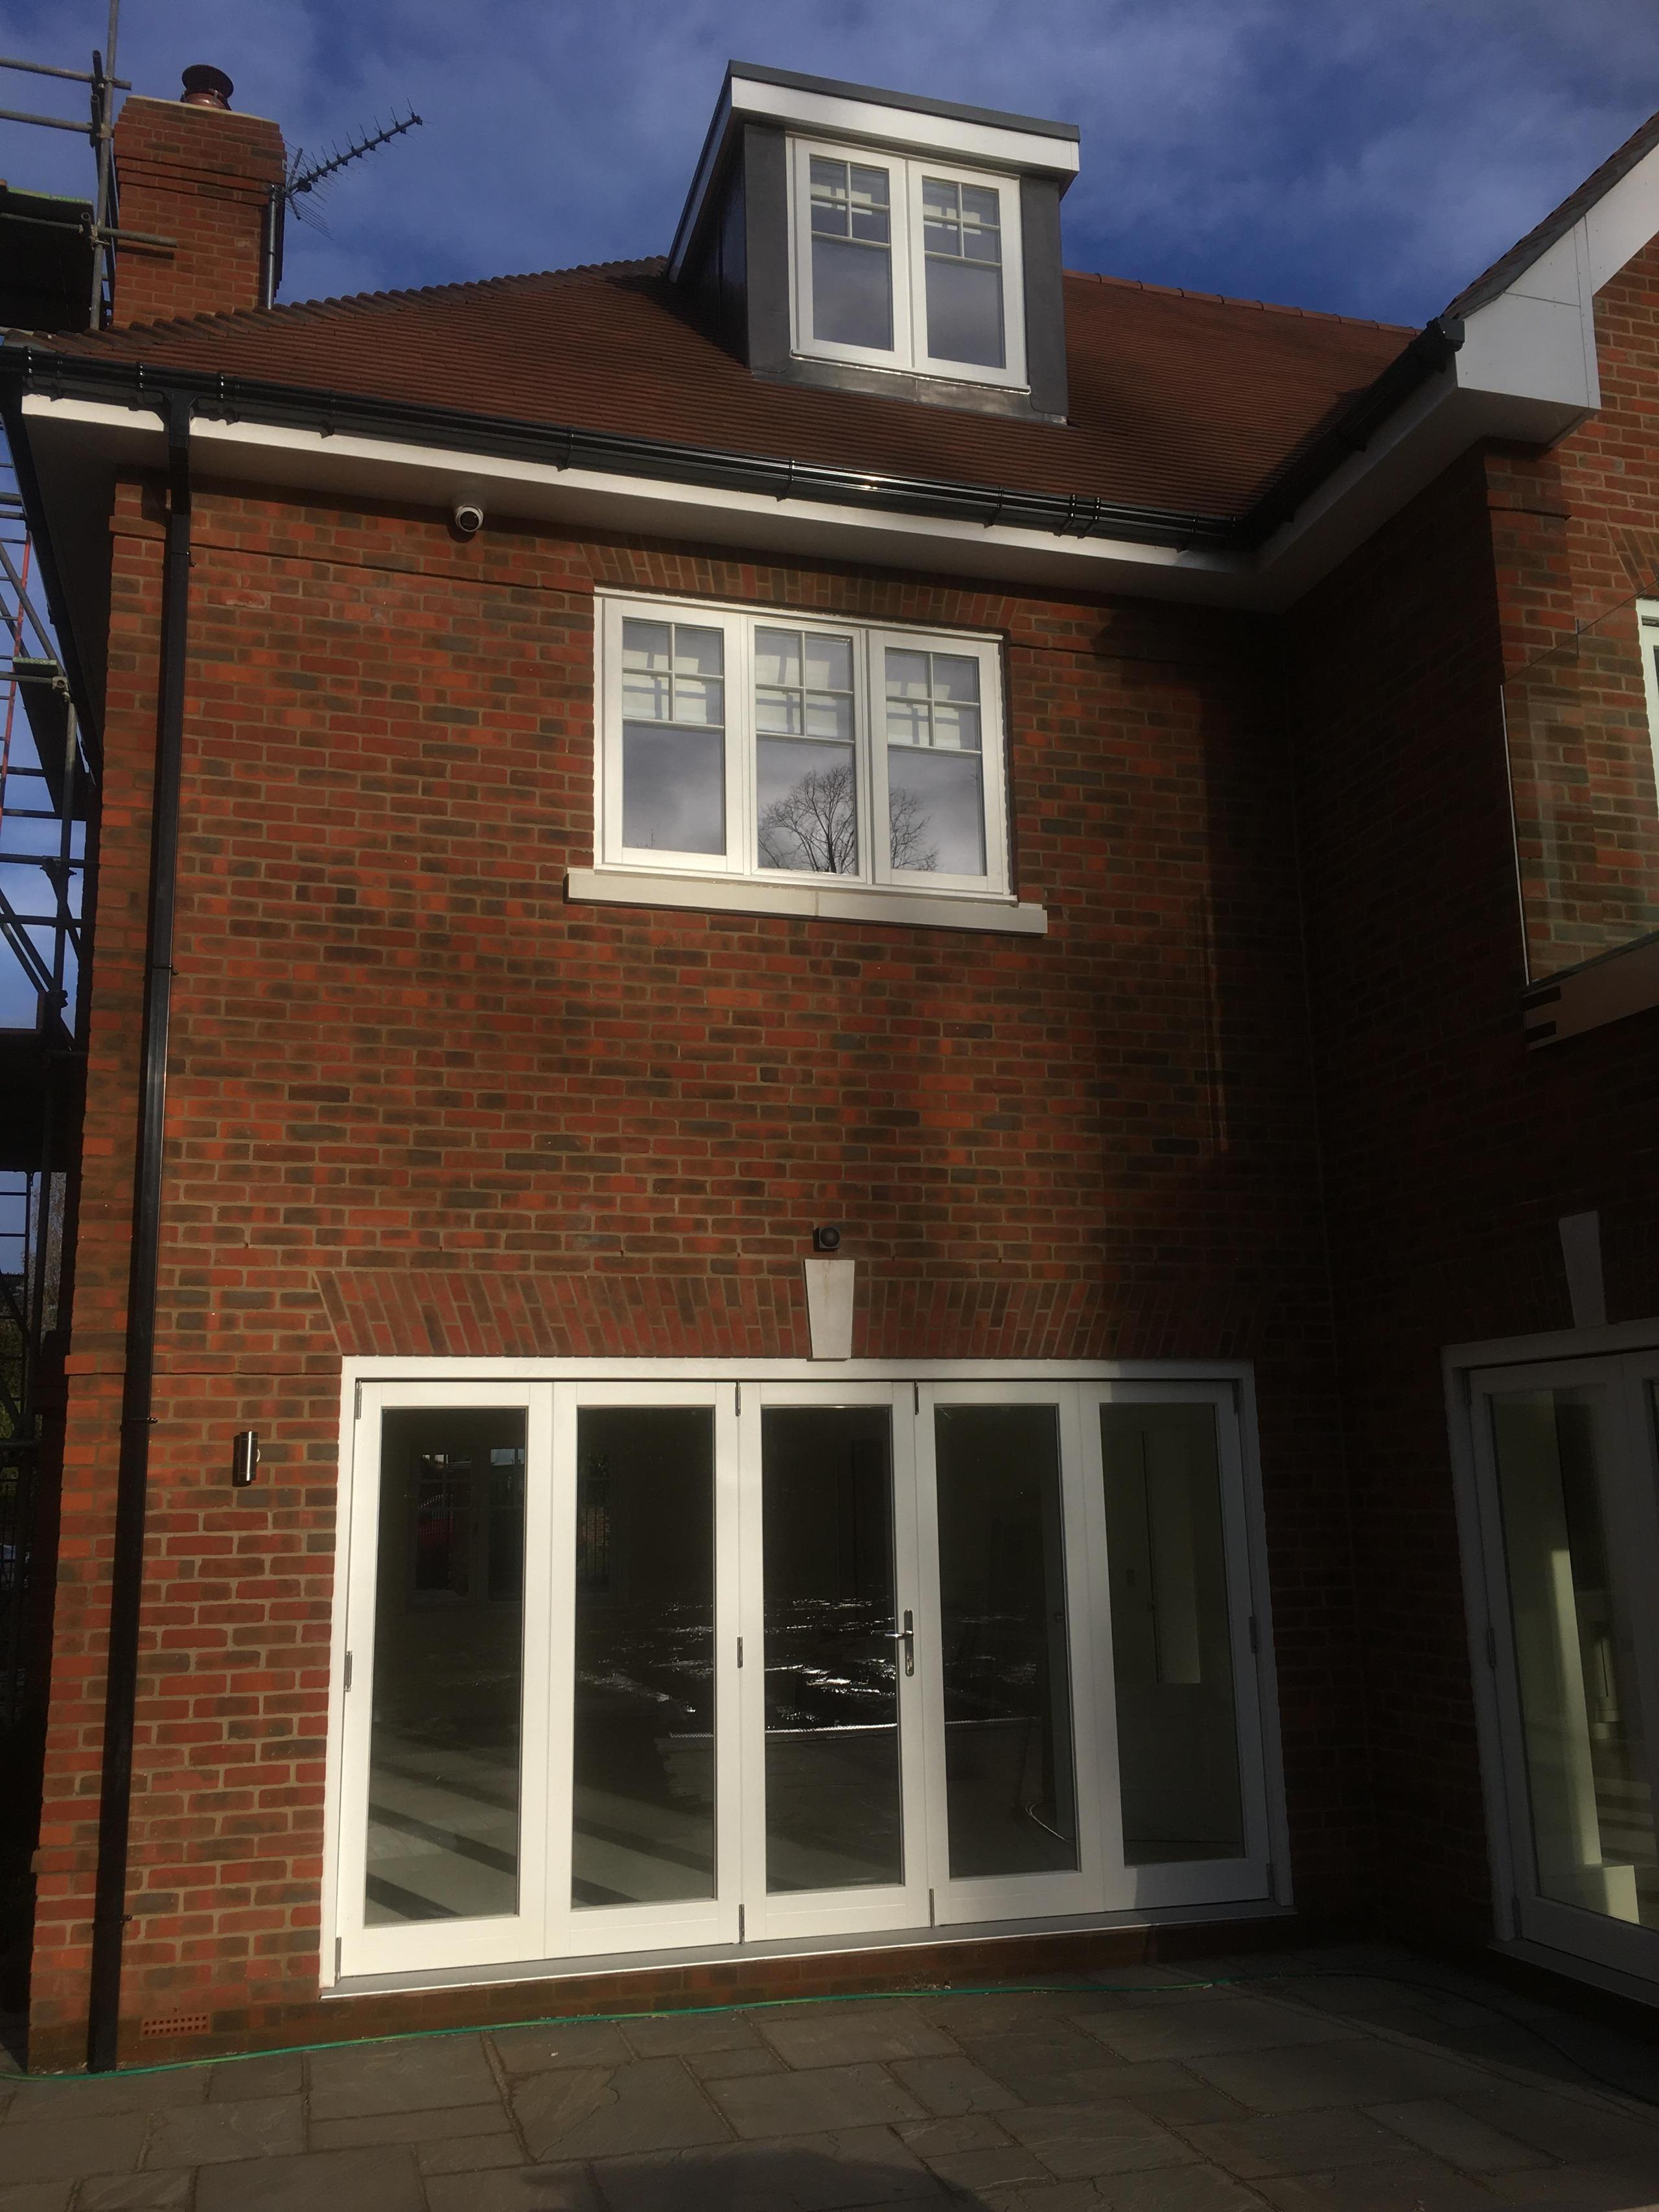 We supplied and fitted these timber windows to this new build house in Sonning Berkshire